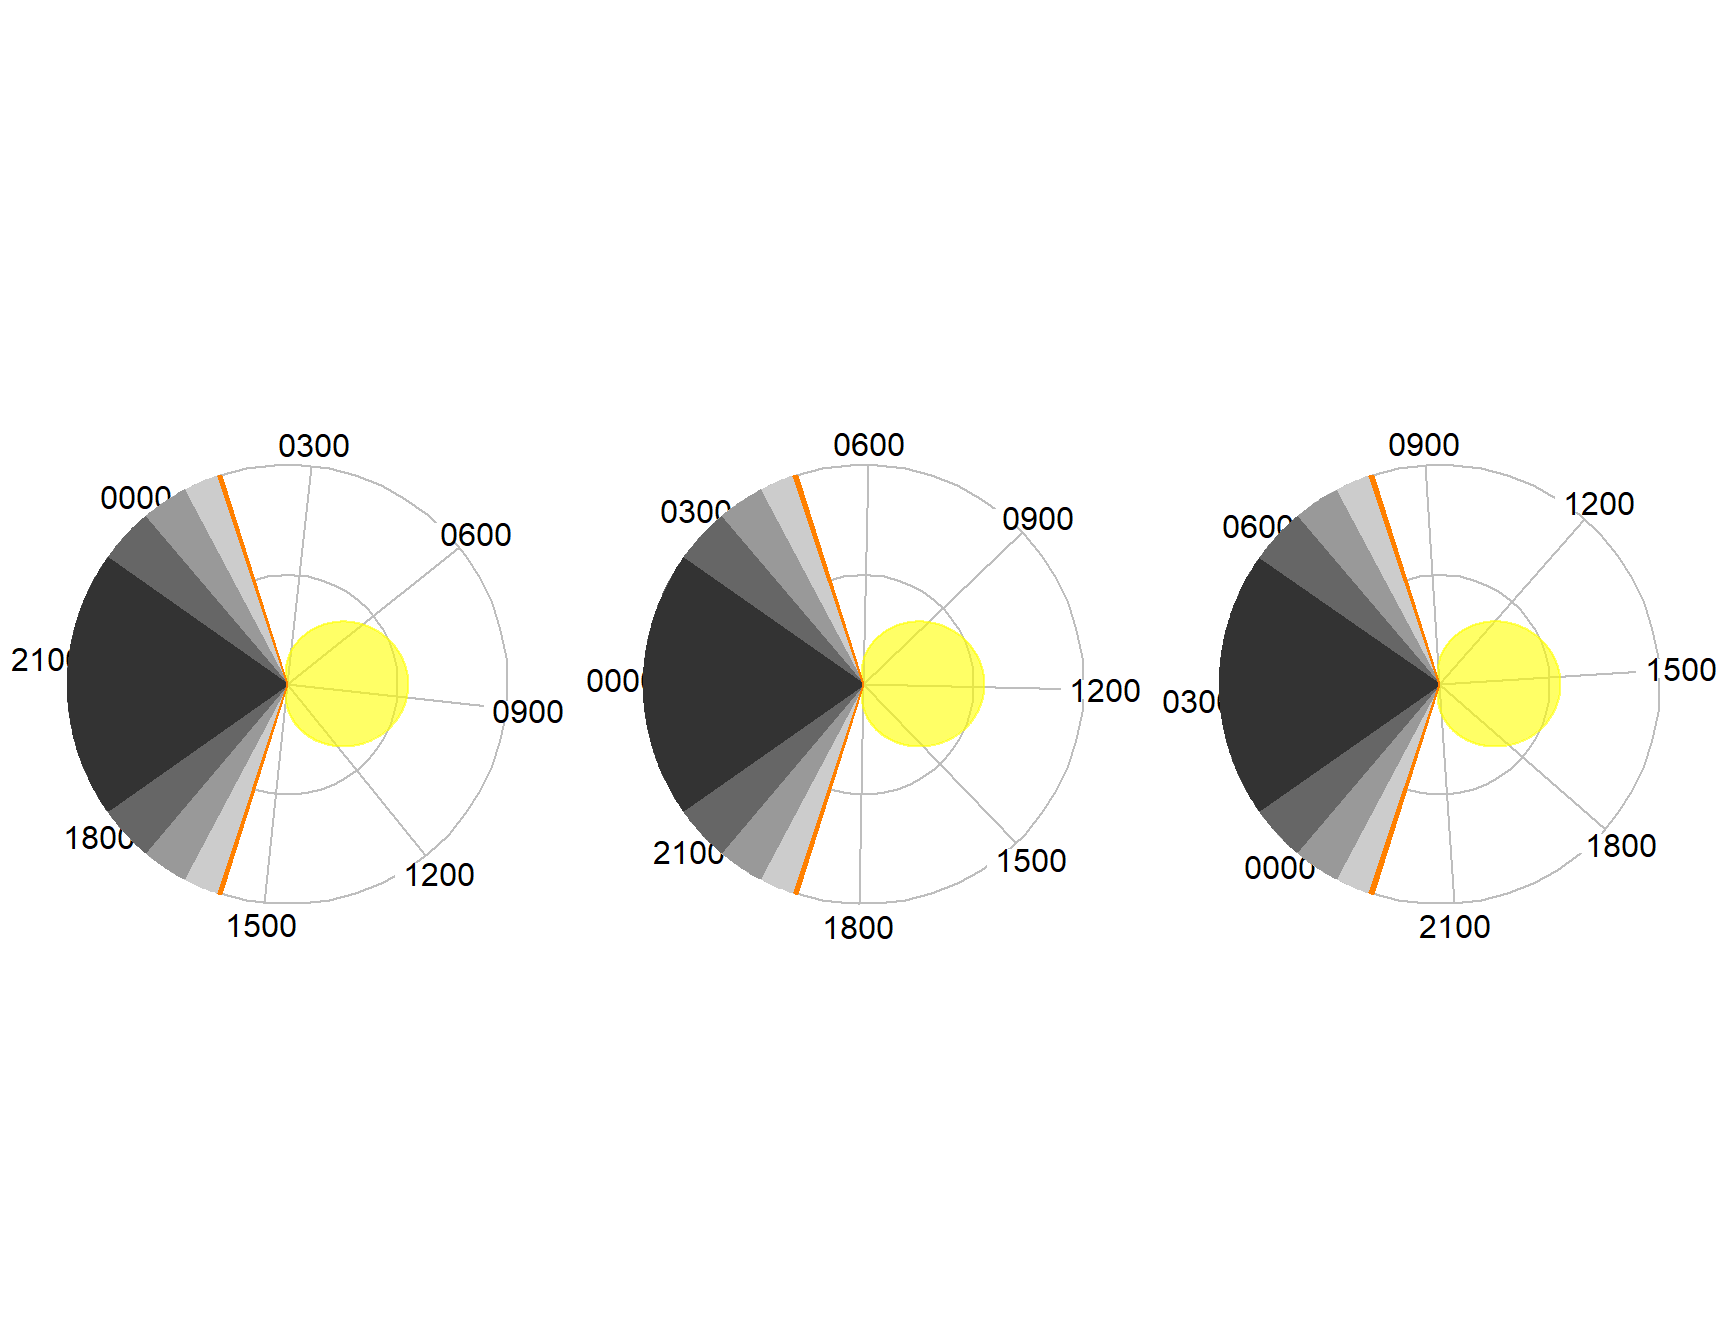 The same diel plots aligned to solar noon